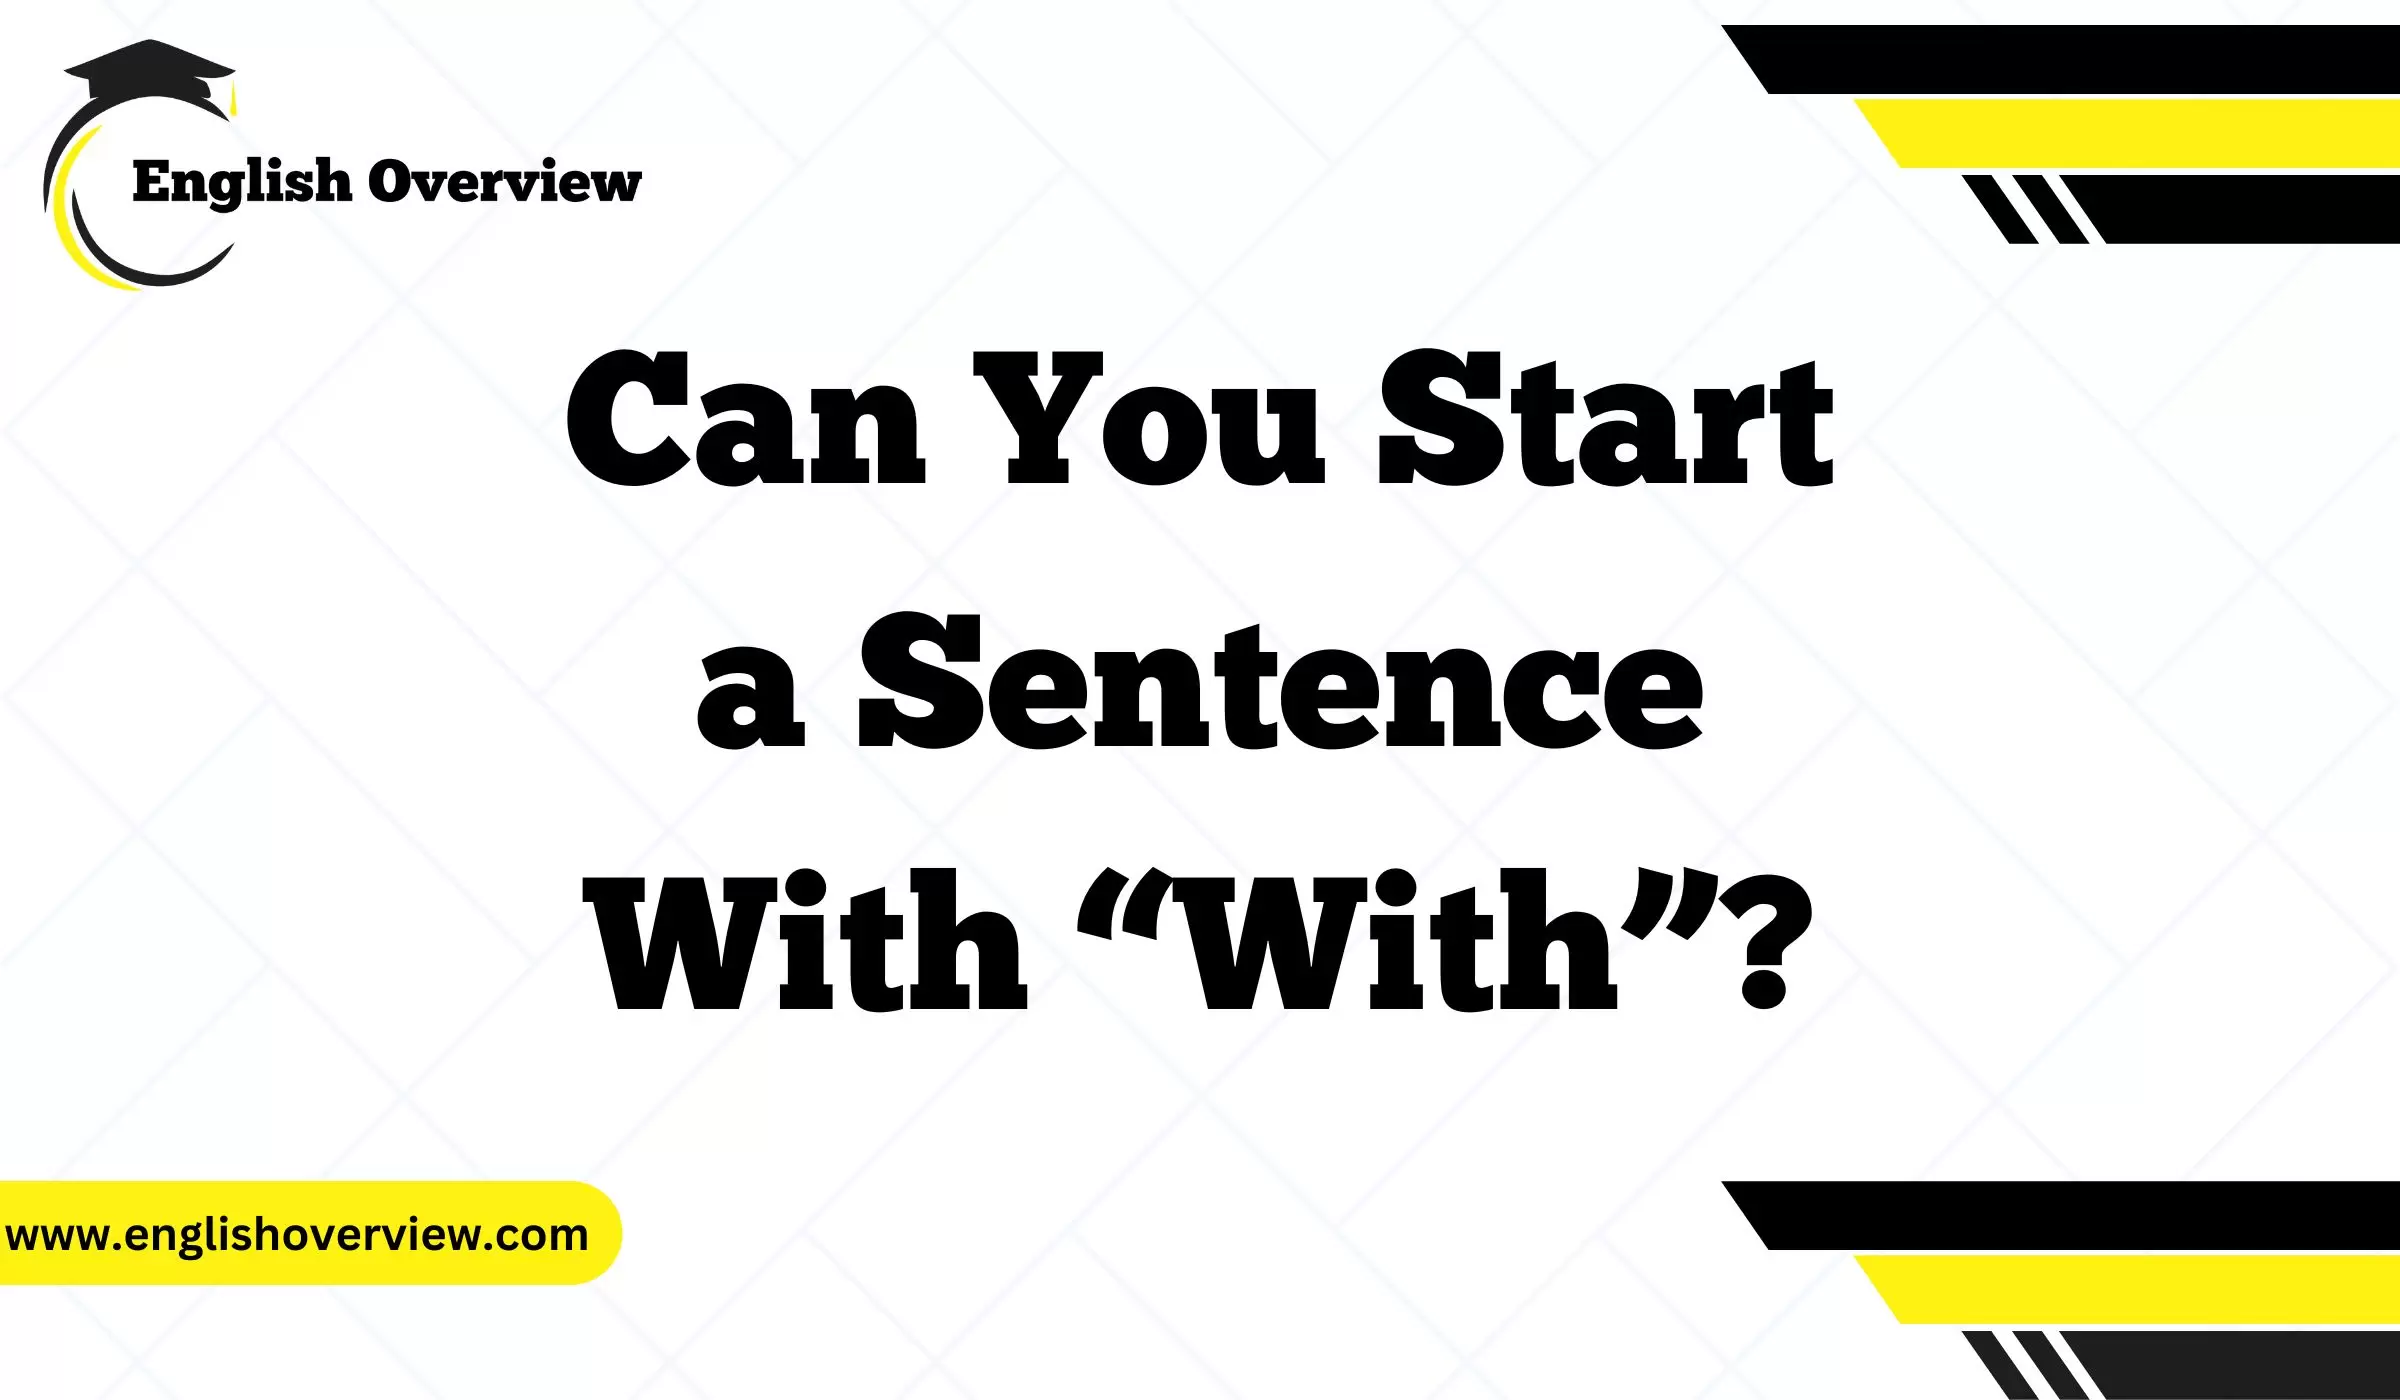 Can You Start a Sentence With “With”